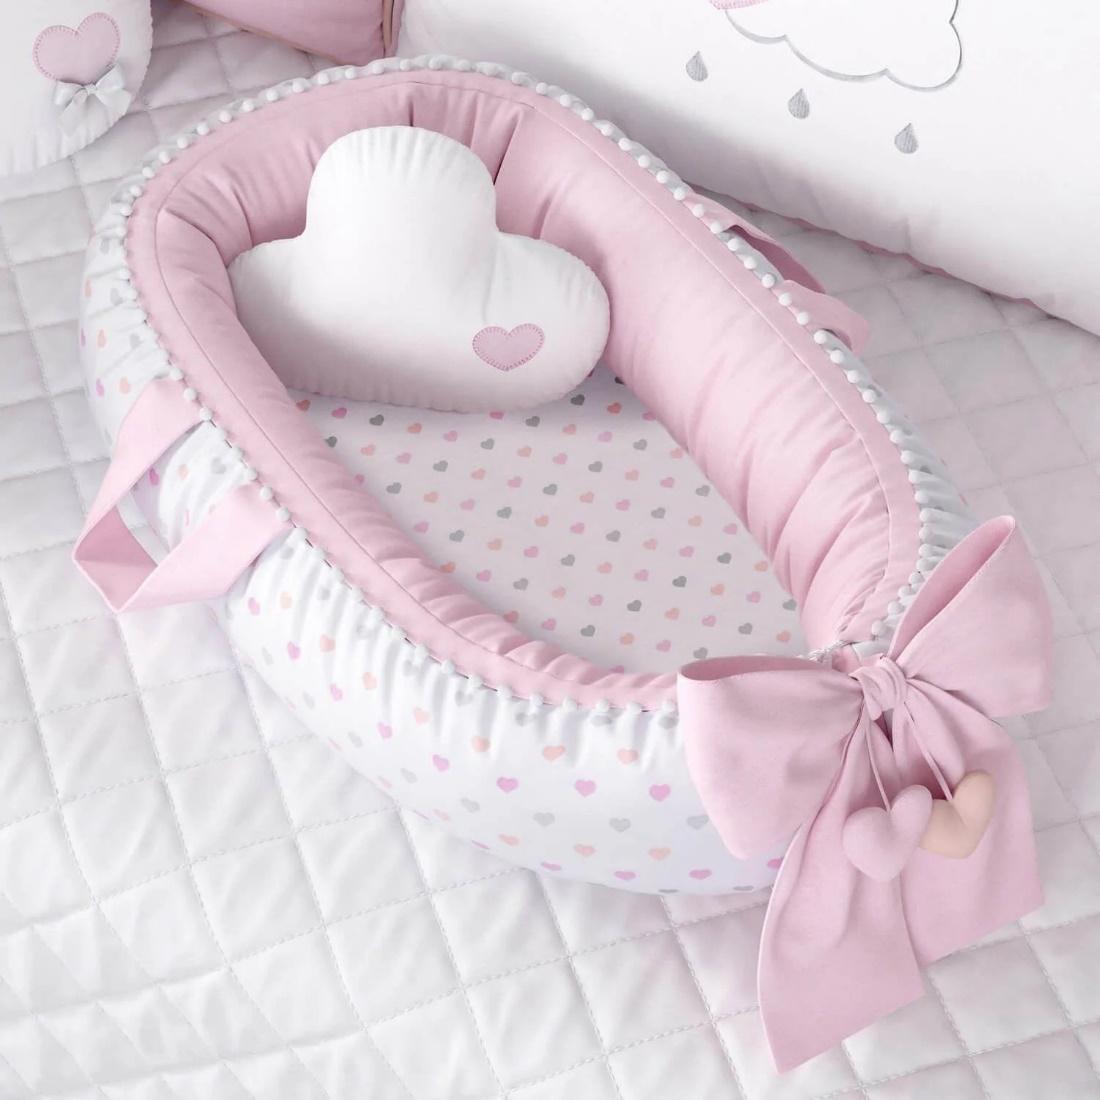 Recalled Pink Pompom and Hearts Baby Nest, 100334 